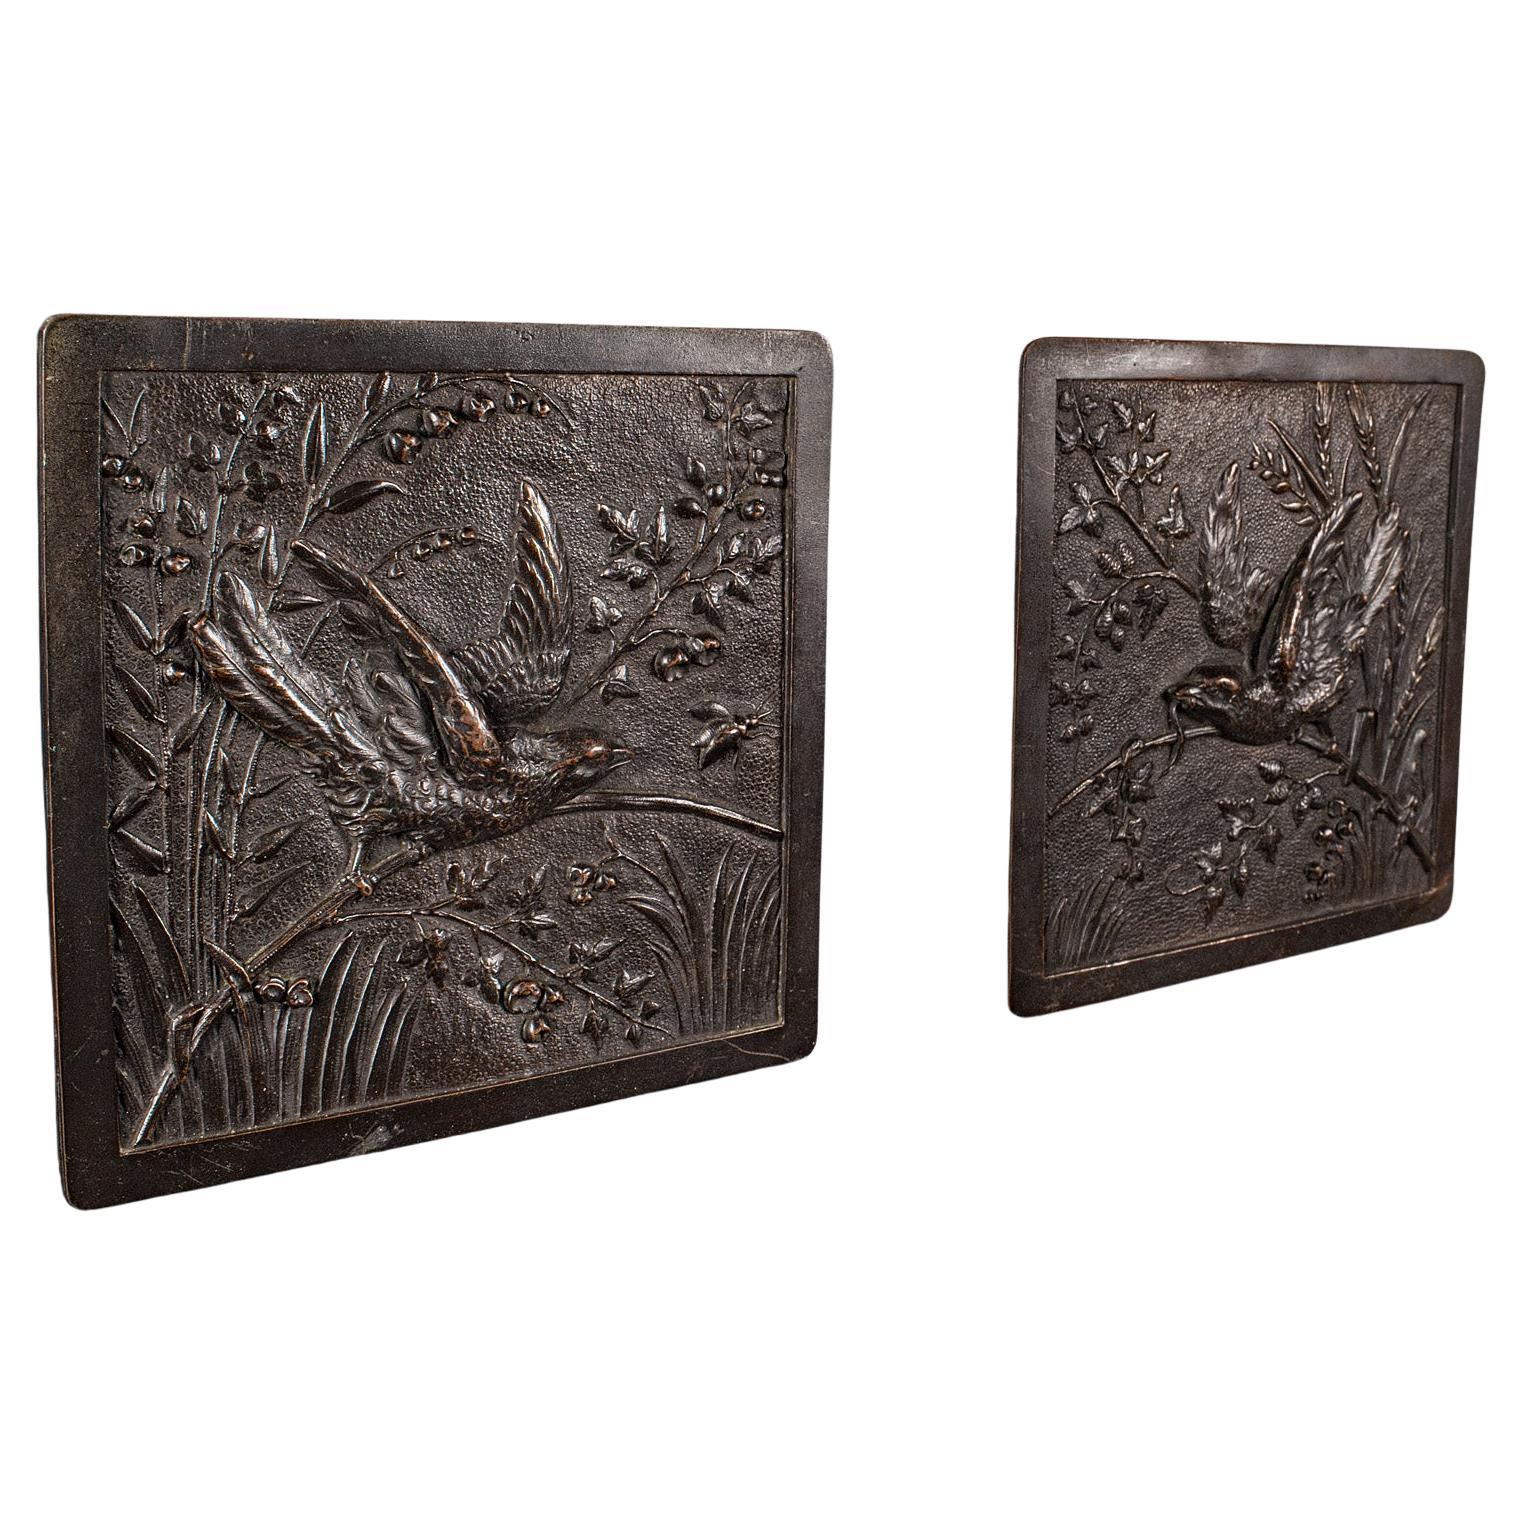 Pair Of Antique Decorative Wall Plaques, Japanese, Bronze, Edo Period, Victorian For Sale